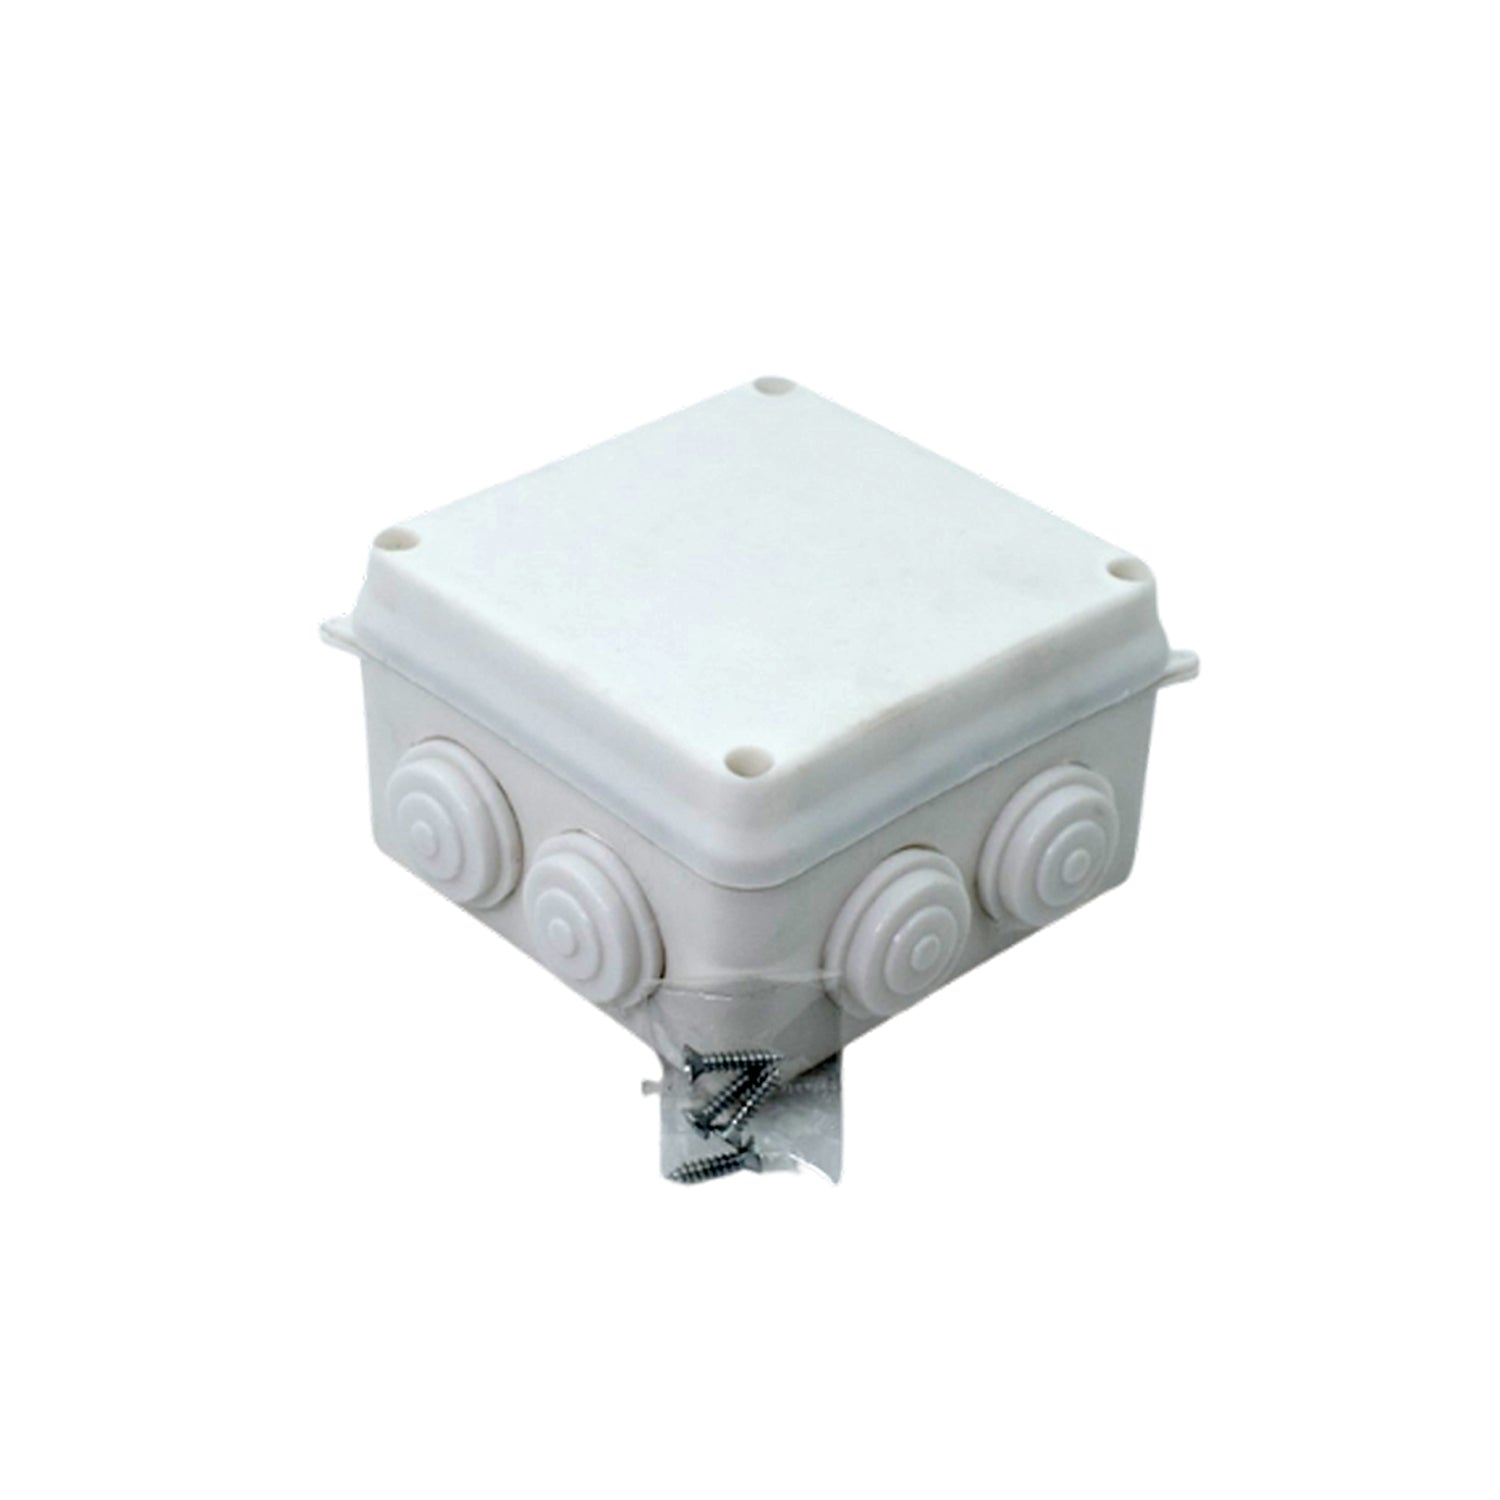 9033 Square Fancy Box For CCTV used for storing CCTV camera’s and all which helps it from being comes in contact with damages.